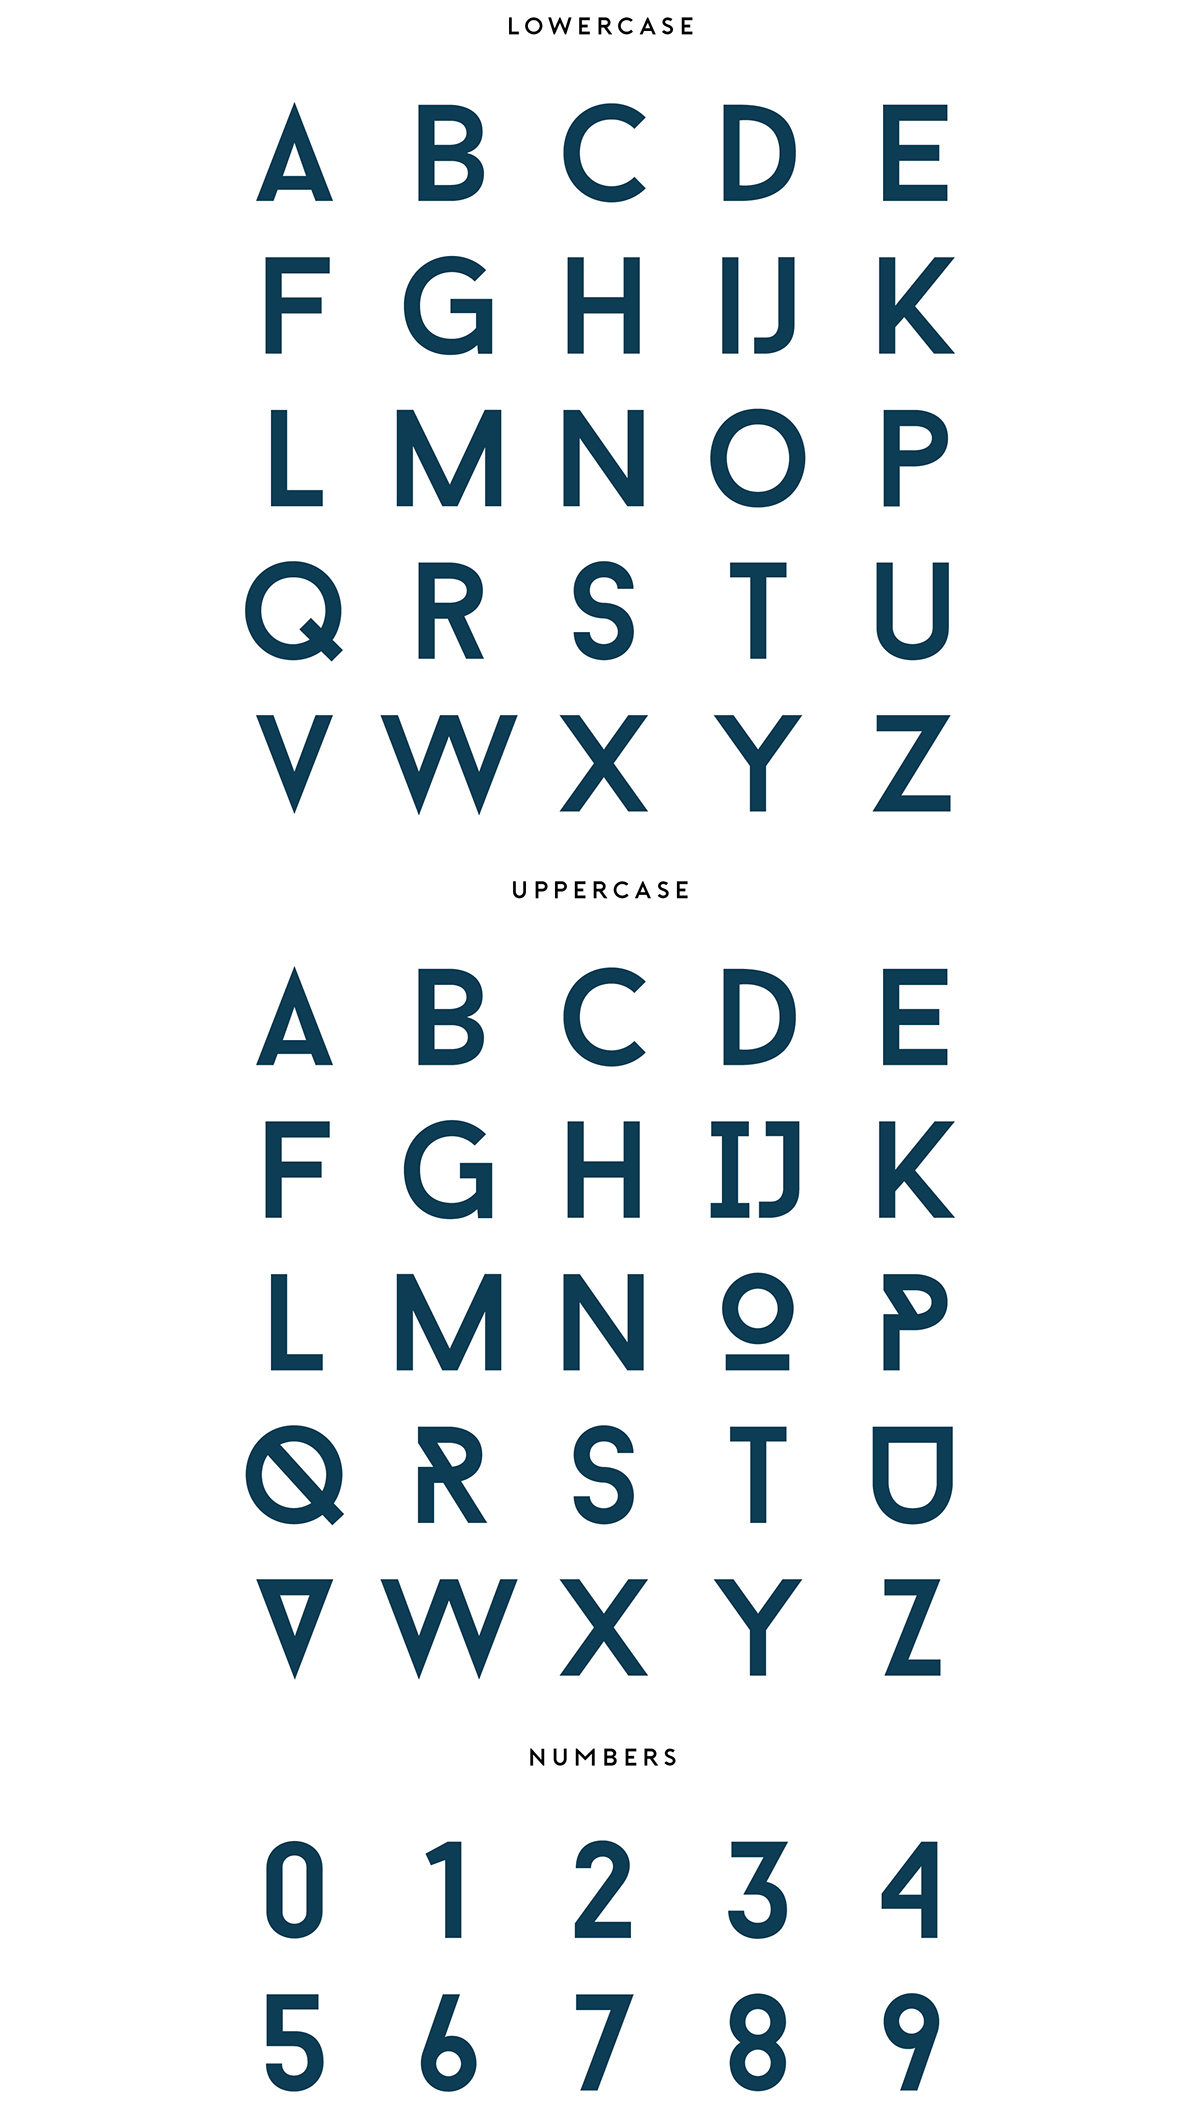 Free font free fonts font Typeface type free type free fonts free typeface freebie Cibap